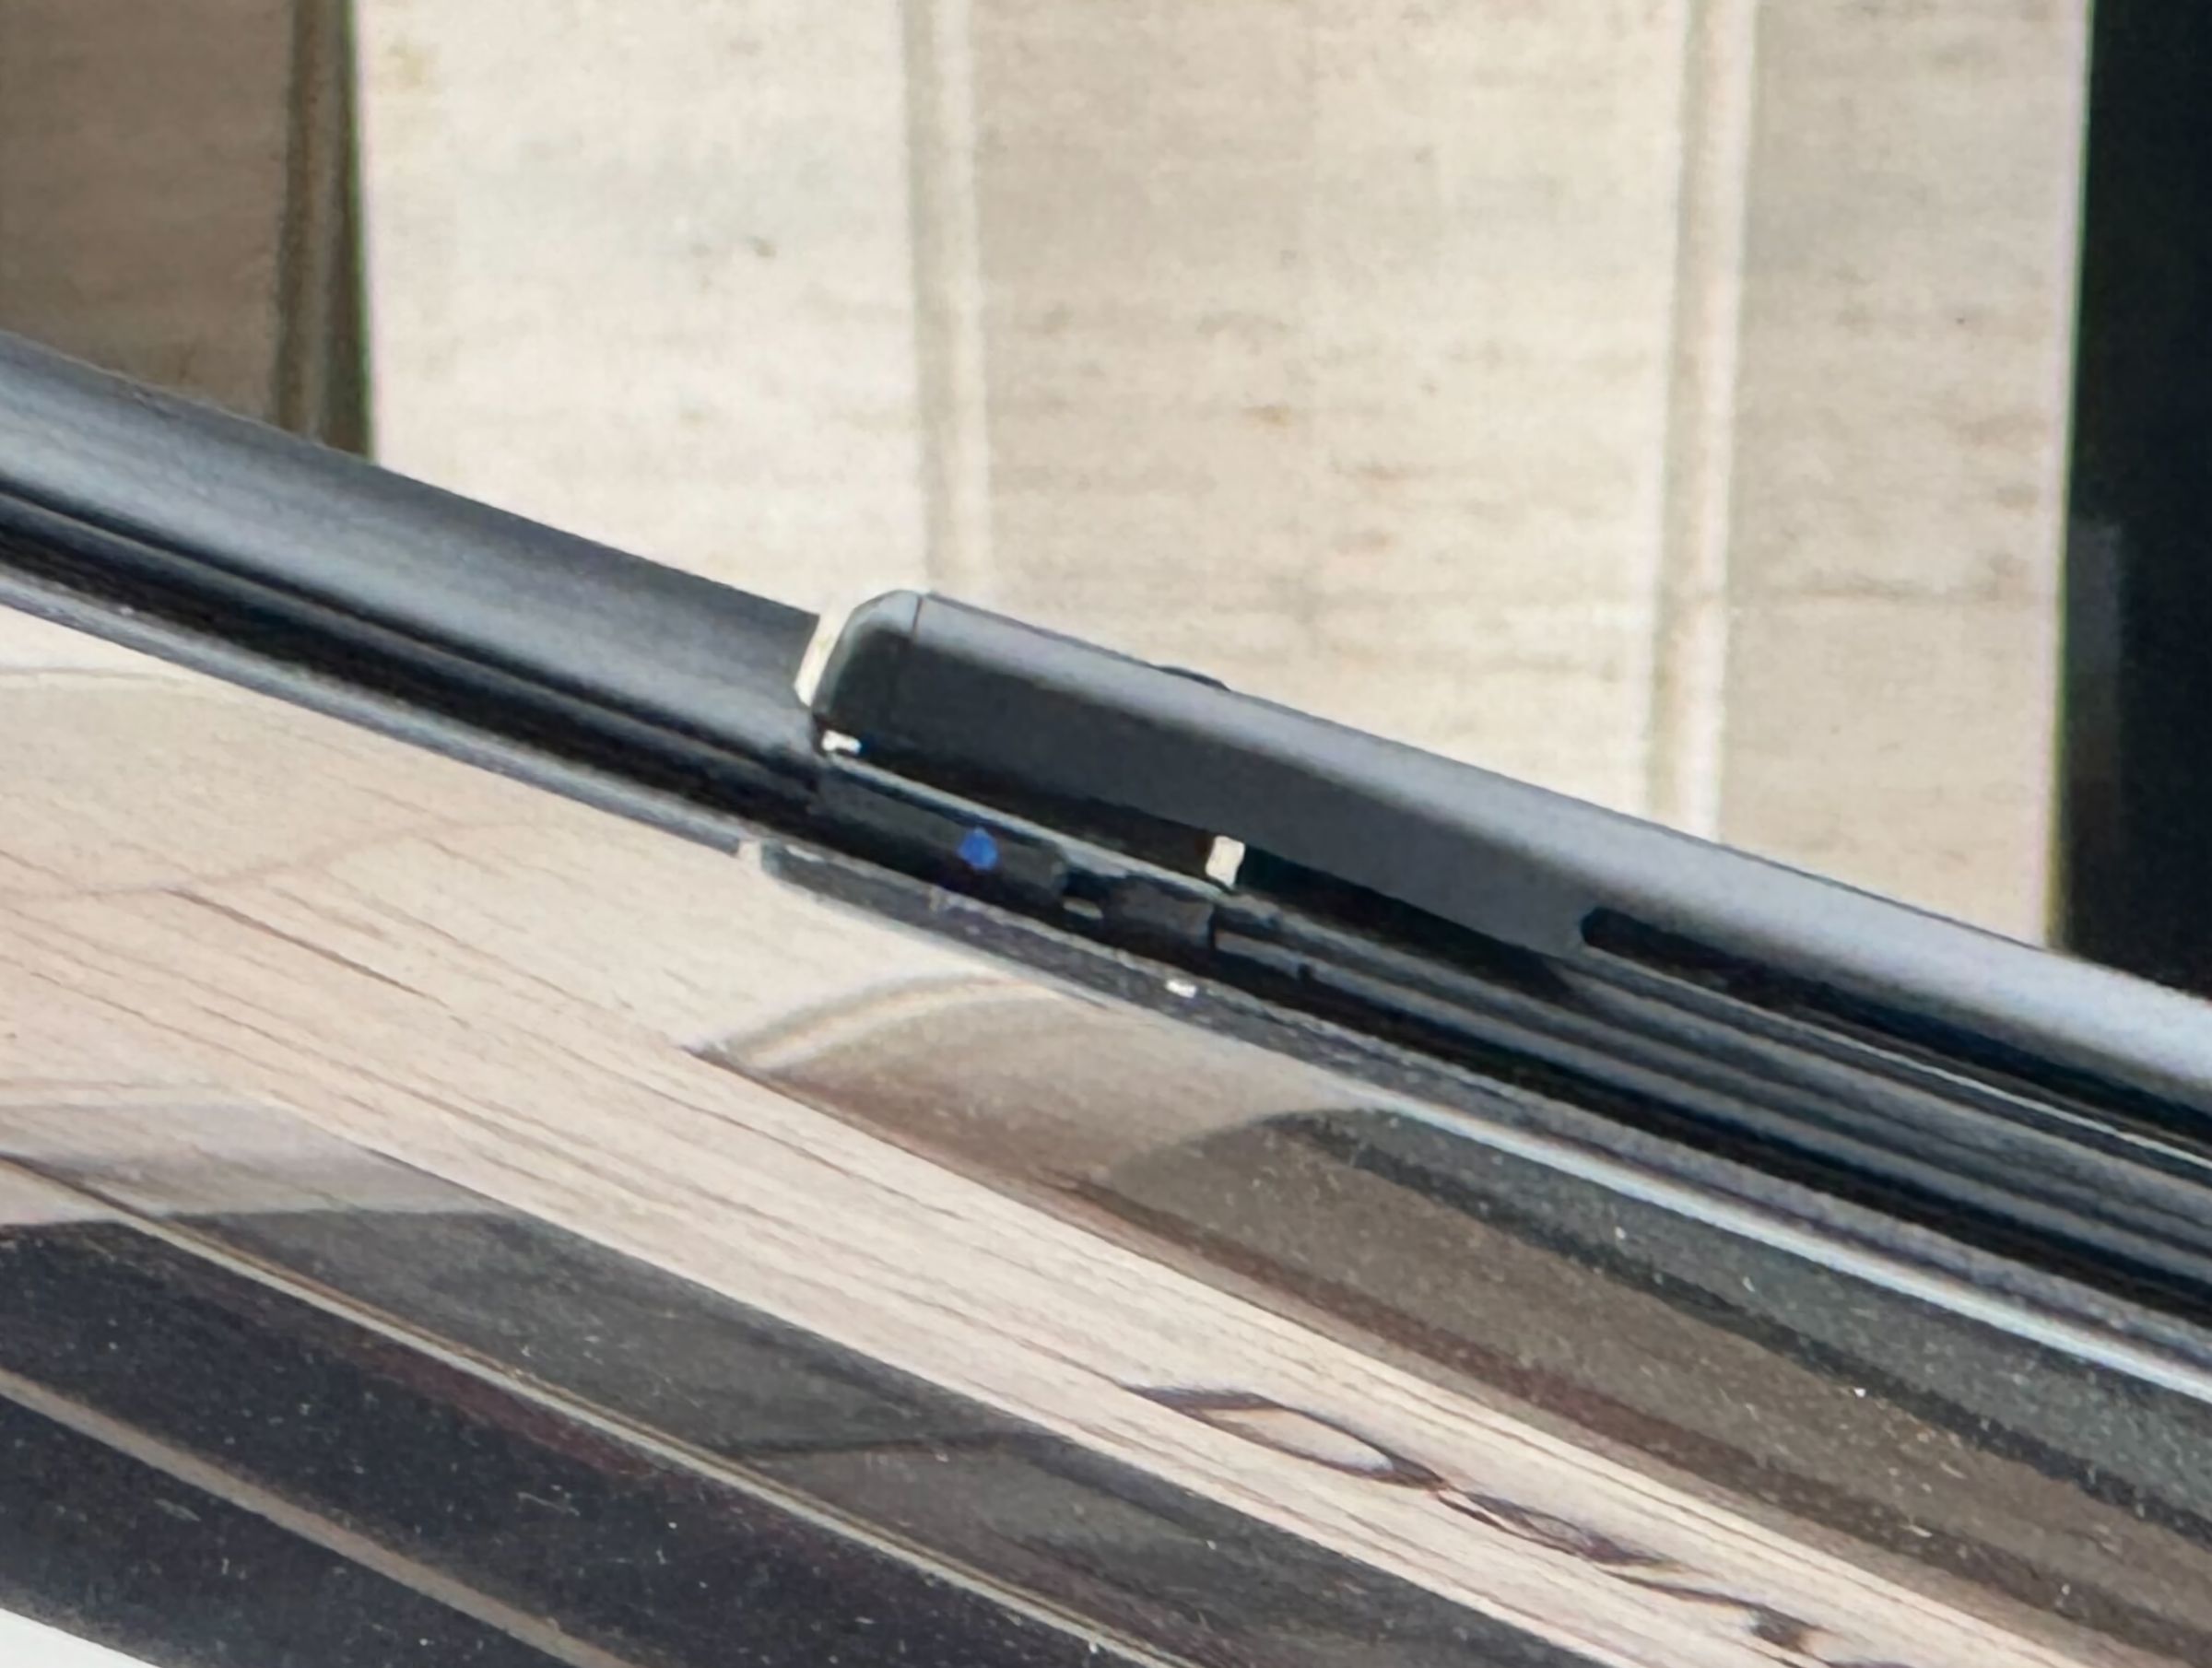 A close-up photo of the Tesla Cybertruck wiper, showing that it appears to actually be two wiper blades.